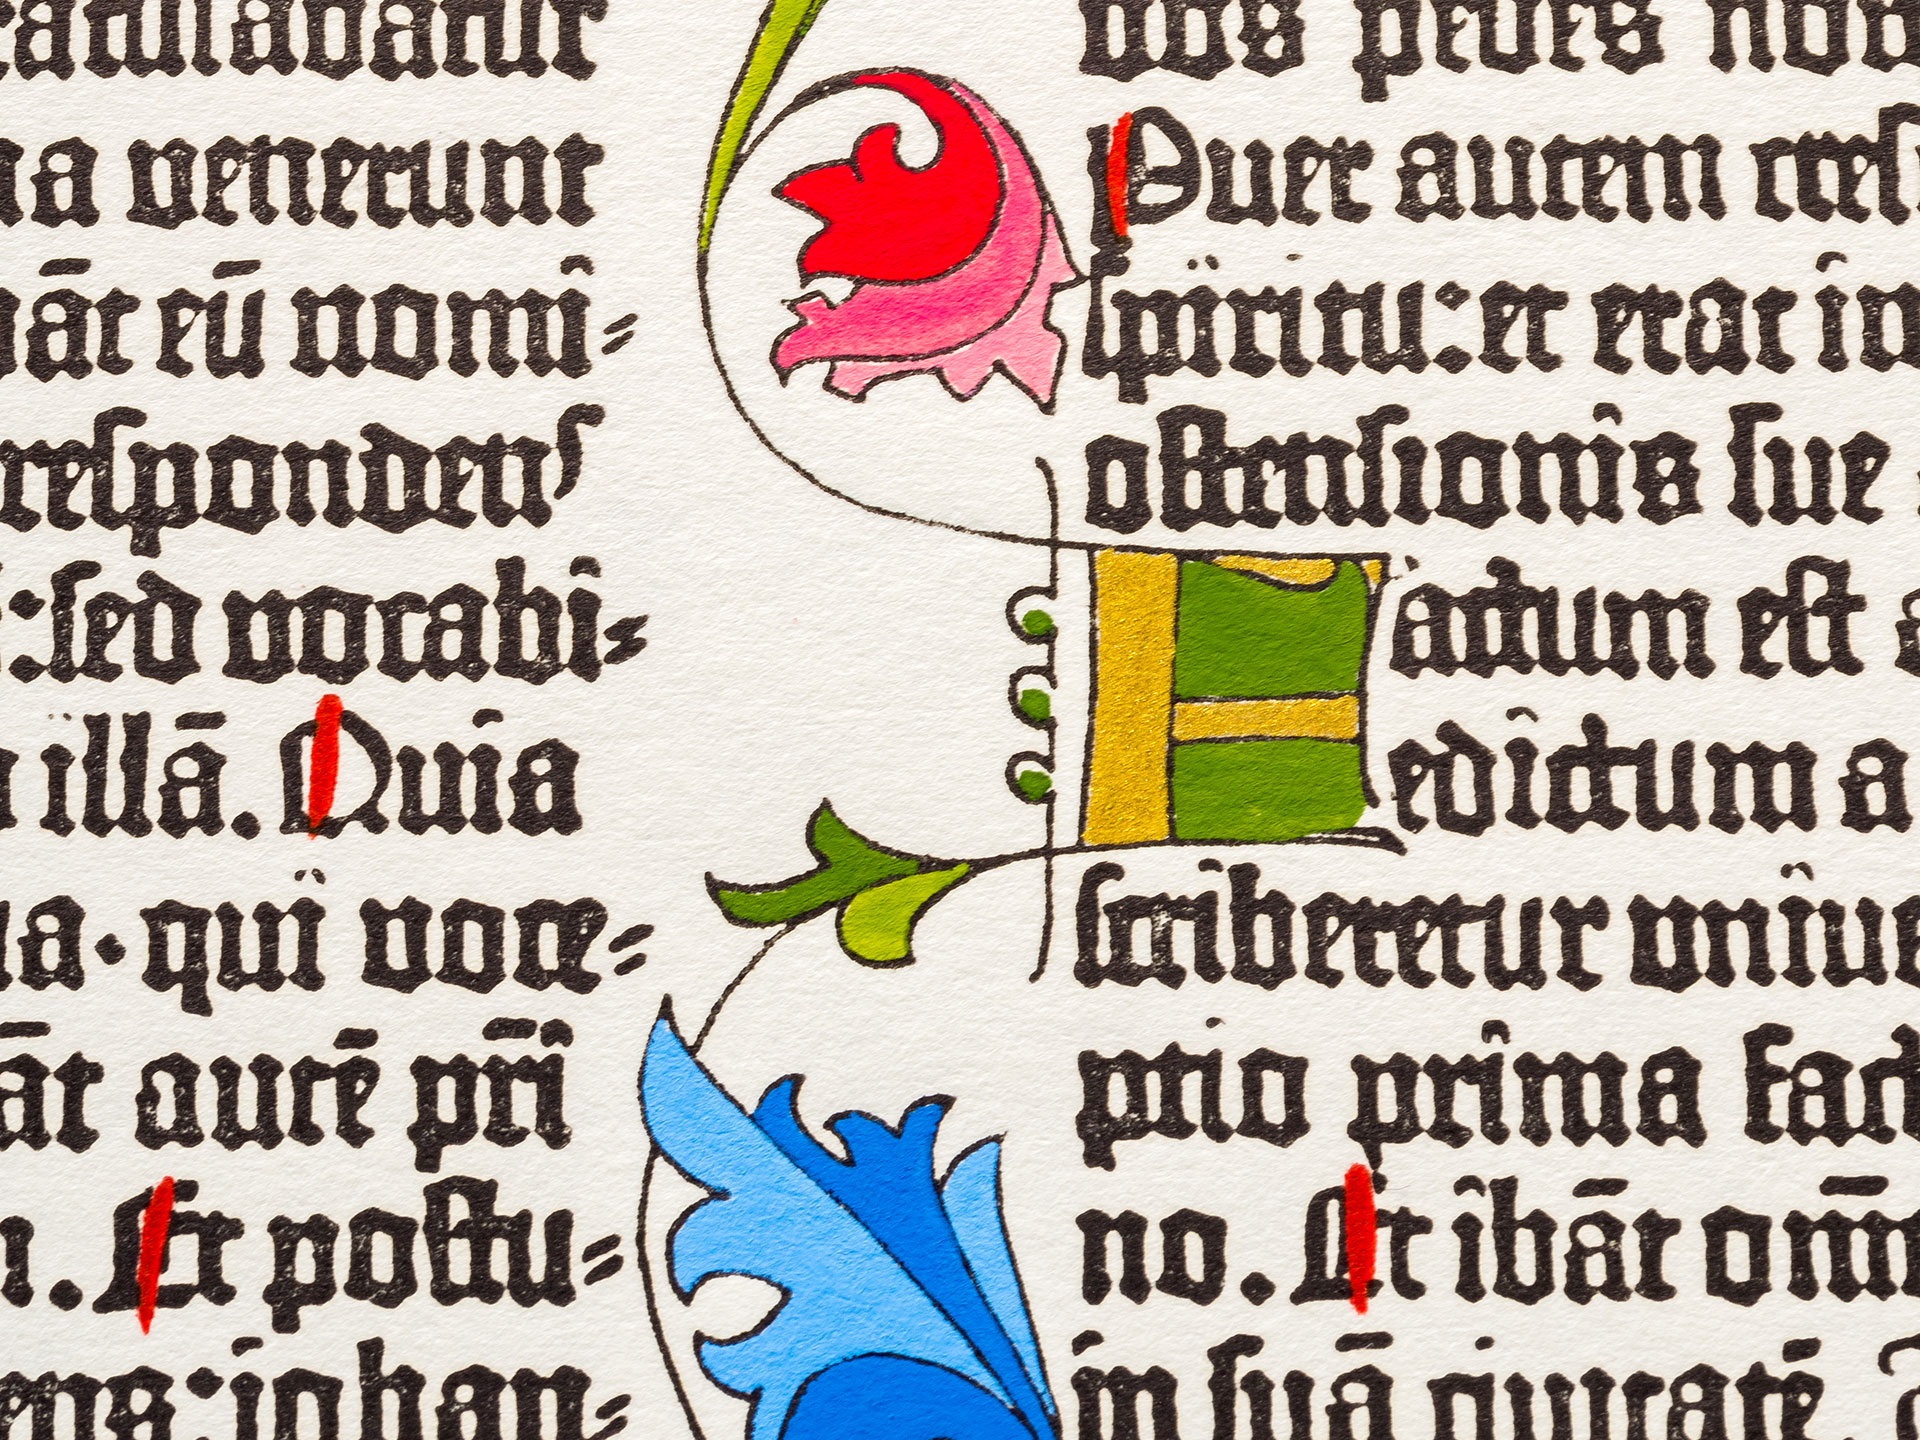 The Christmas story. Press print from the Gutenberg Bible